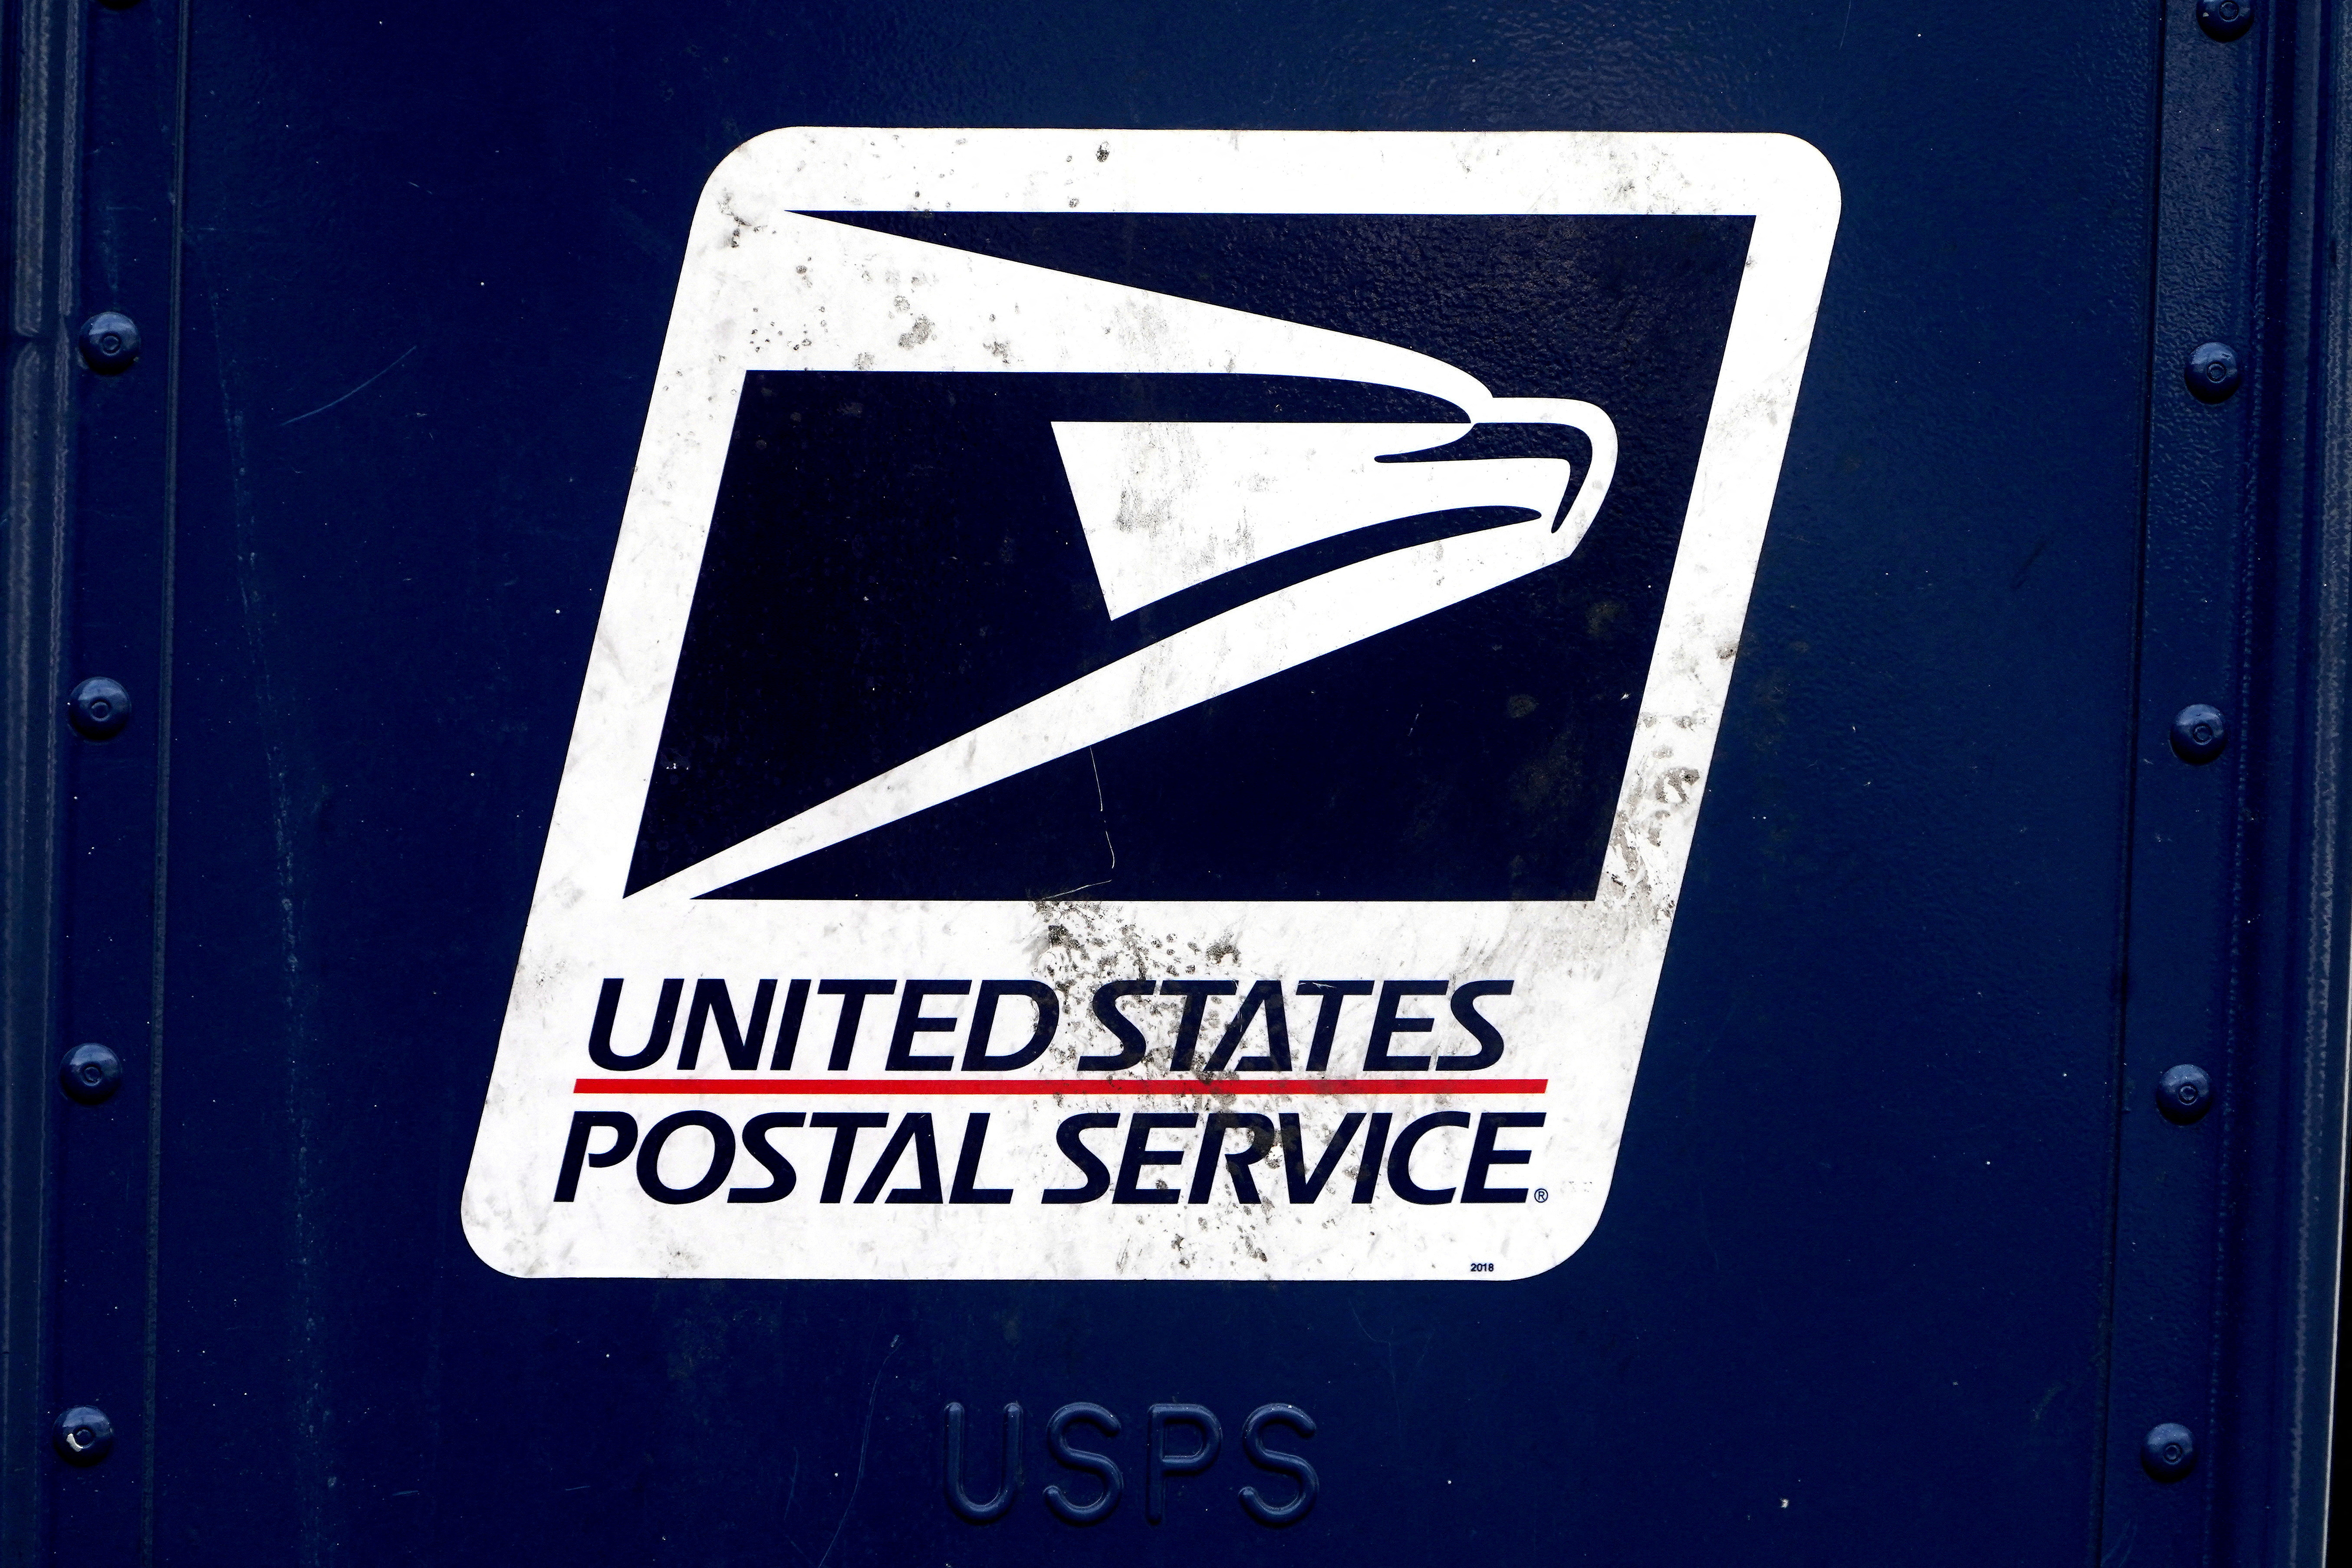 A U.S. Postal Service (USPS) logo is pictured on a mail box